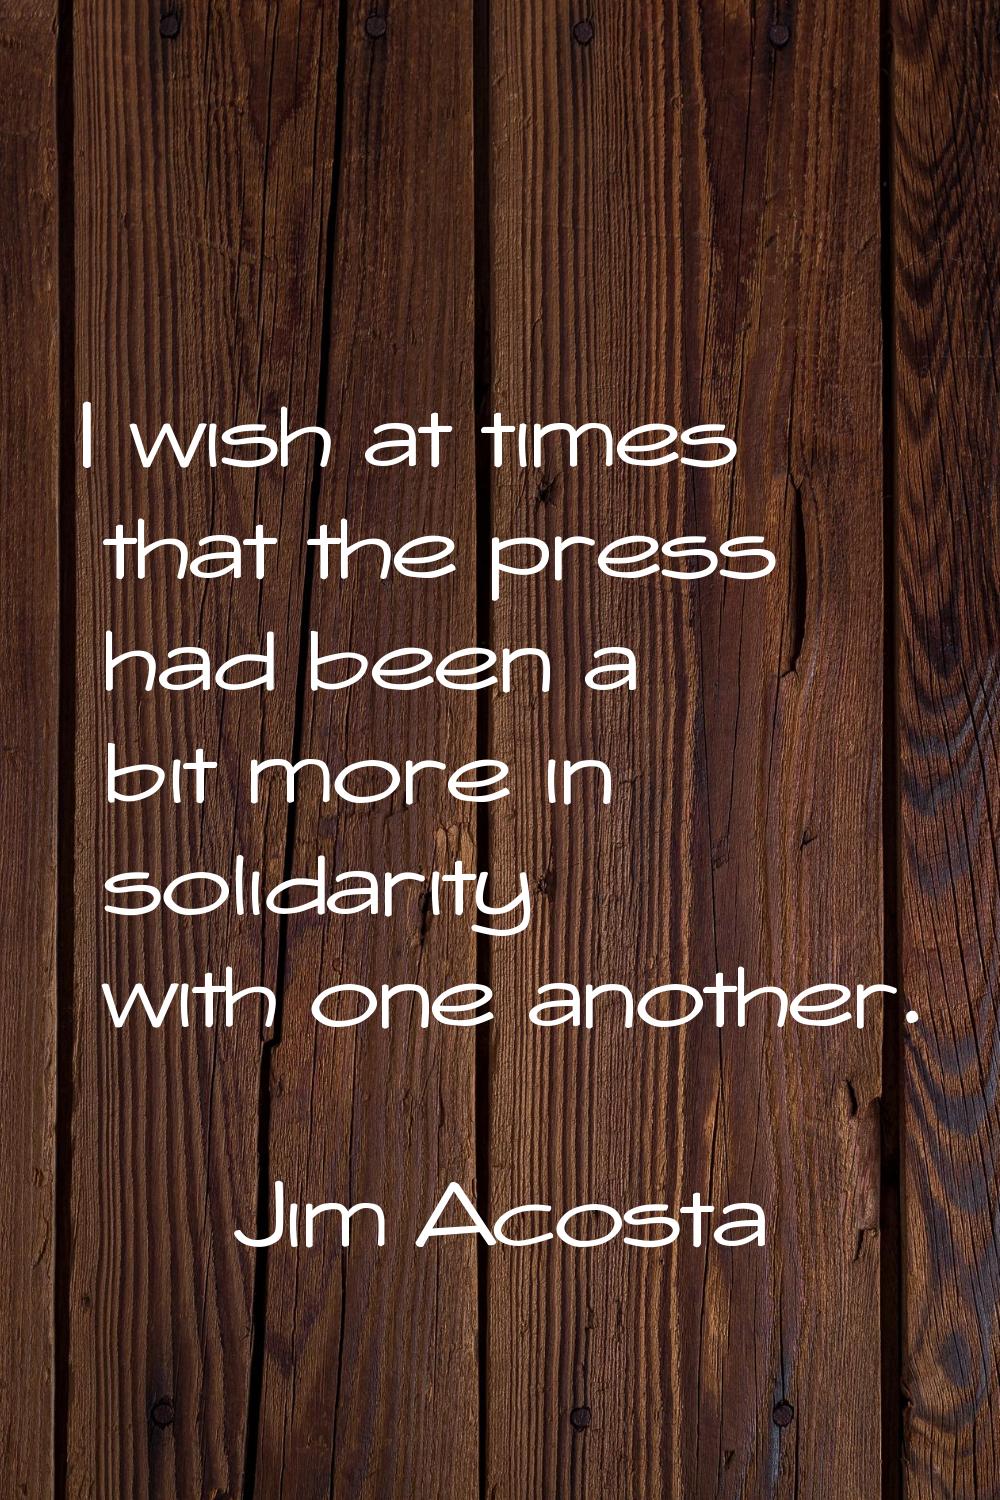 I wish at times that the press had been a bit more in solidarity with one another.